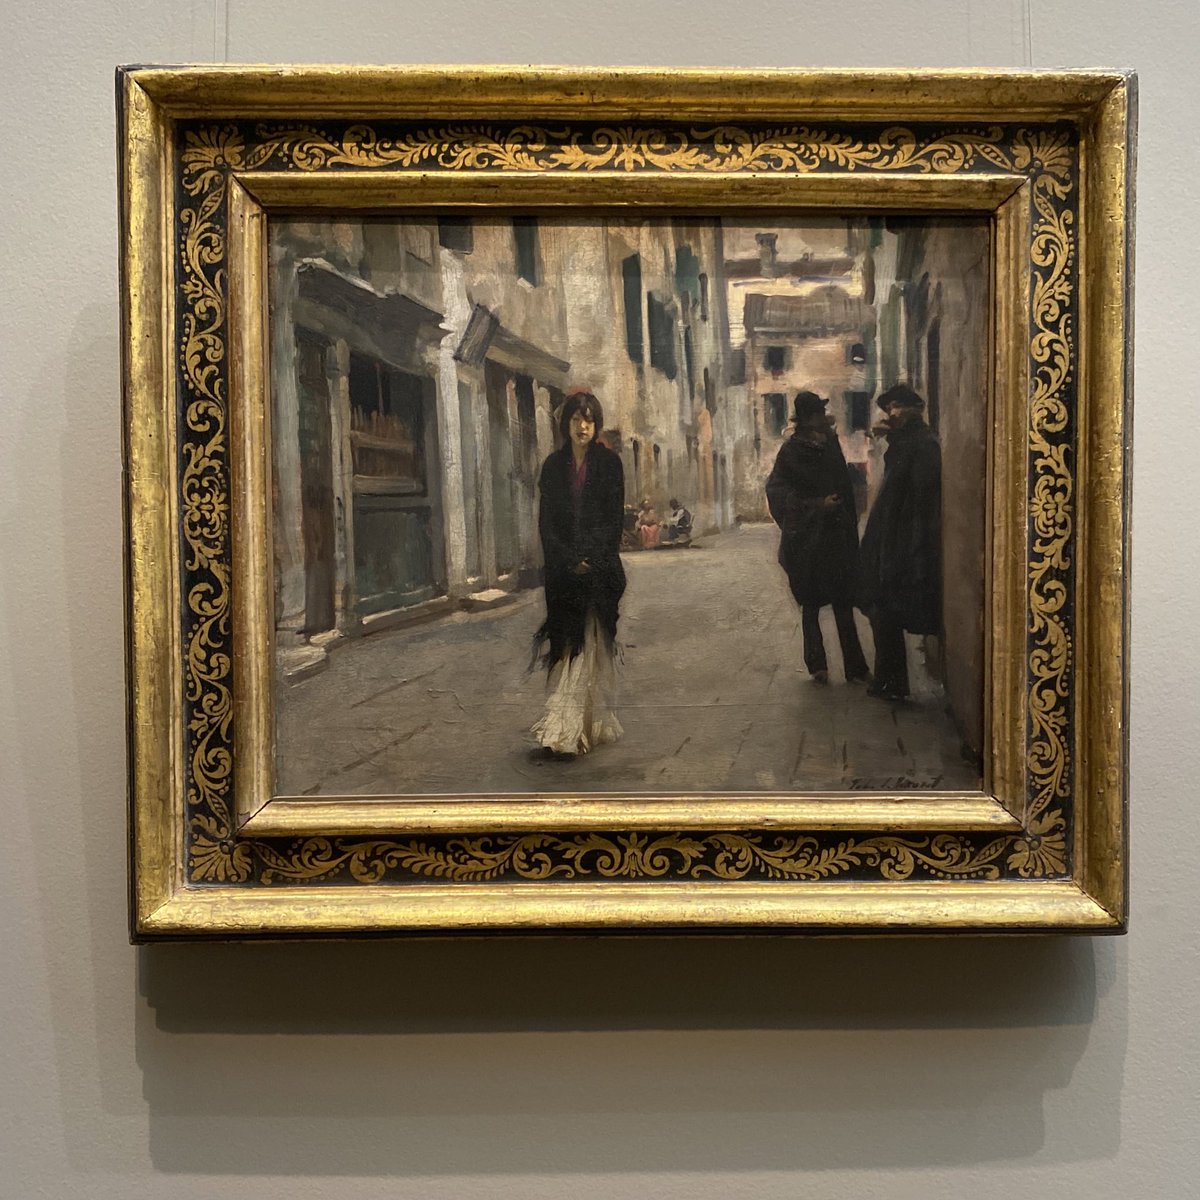 Upon its first exhibition in Paris in 1882, a critic wrote: "Here we do not see either the Grand Canal or Saint Mark's square; all that is banal and hackneyed. Mr. Sargent leads us to modest meeting places and dark, shallow rooms, all black, pierced through by a ray of sunlight.”